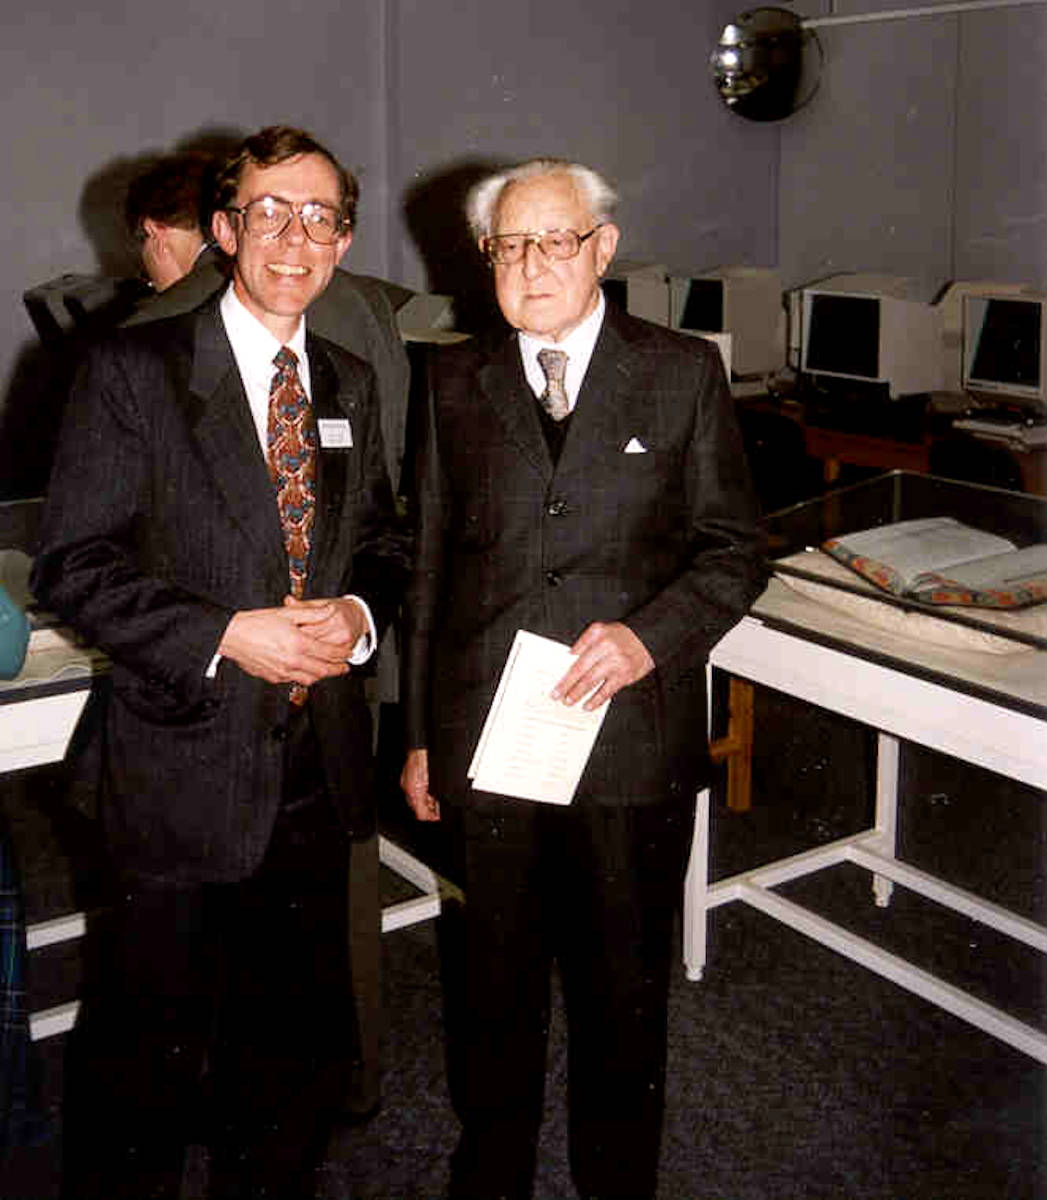 Will Smith County Archivist of the RBA 1926 to 1967 stands next to Peter Durrant MBE who was County Archivist of the RBA 1988 to 2014.